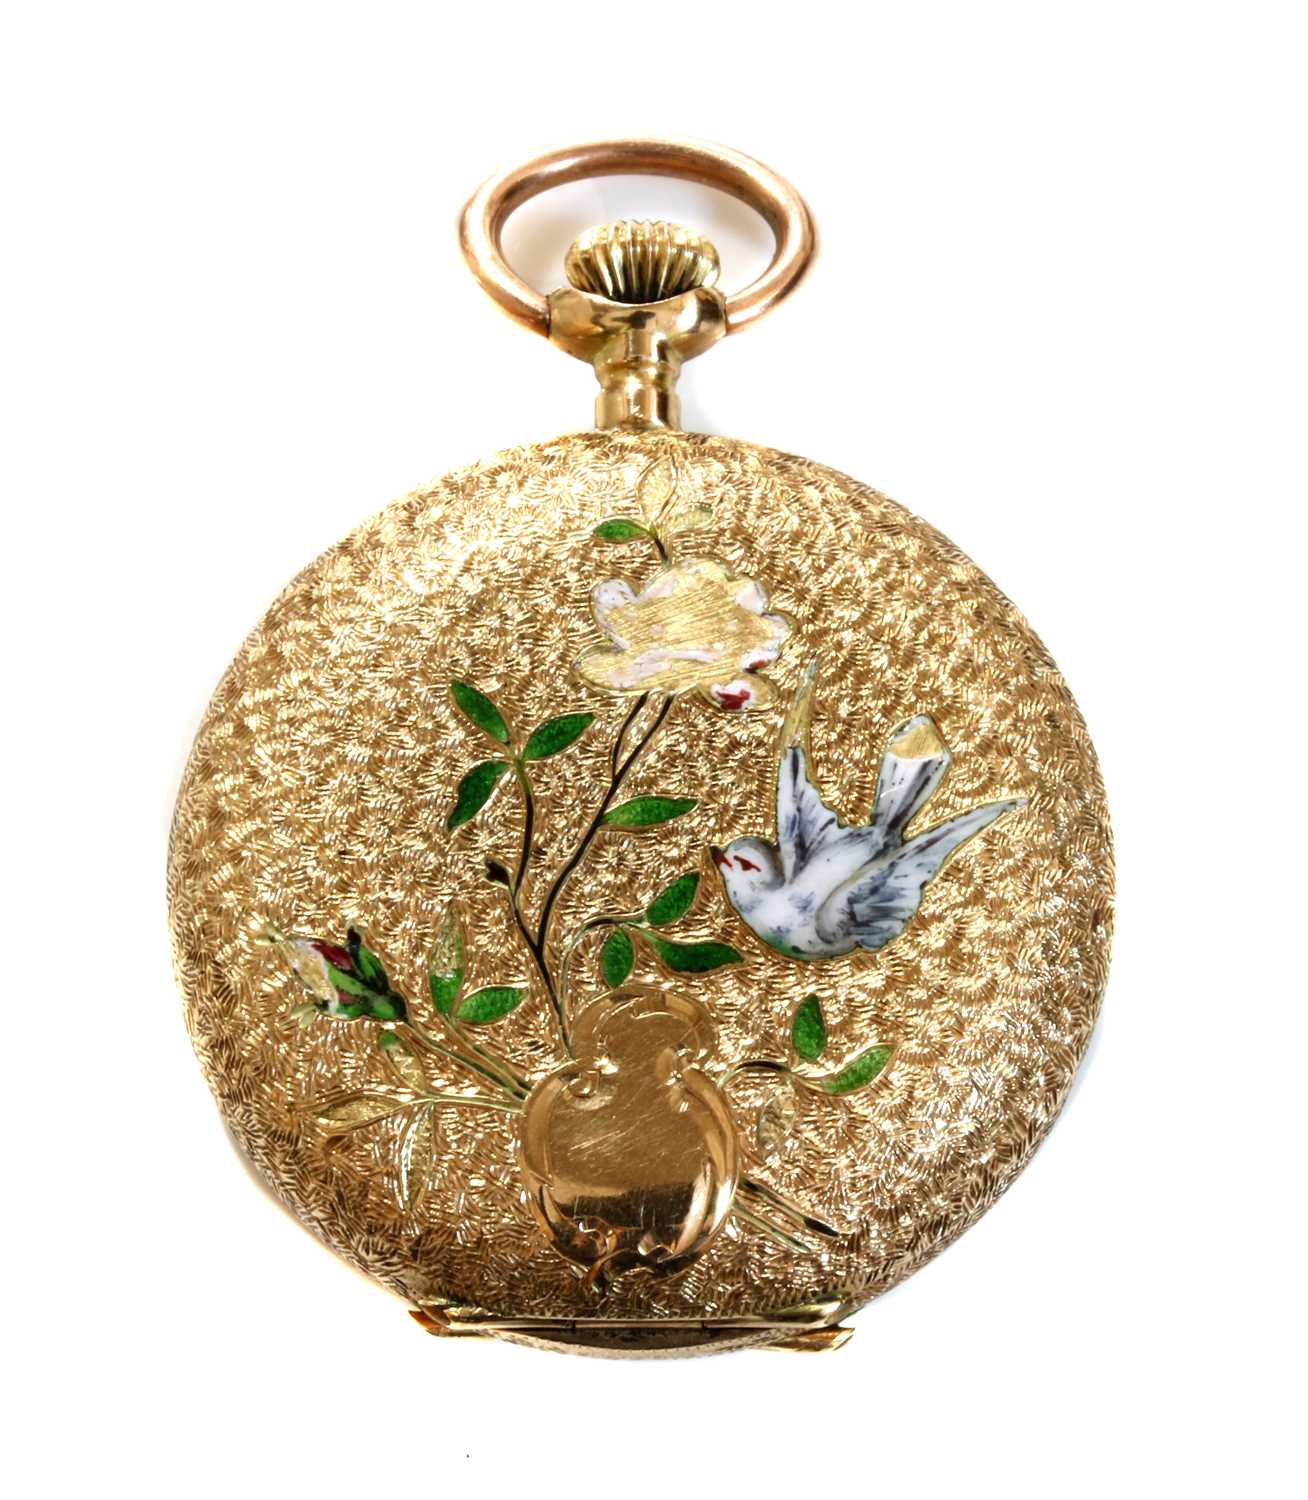 Lot 71 - A Continental gold and enamel hunter-style top wind fob watch, c.1910